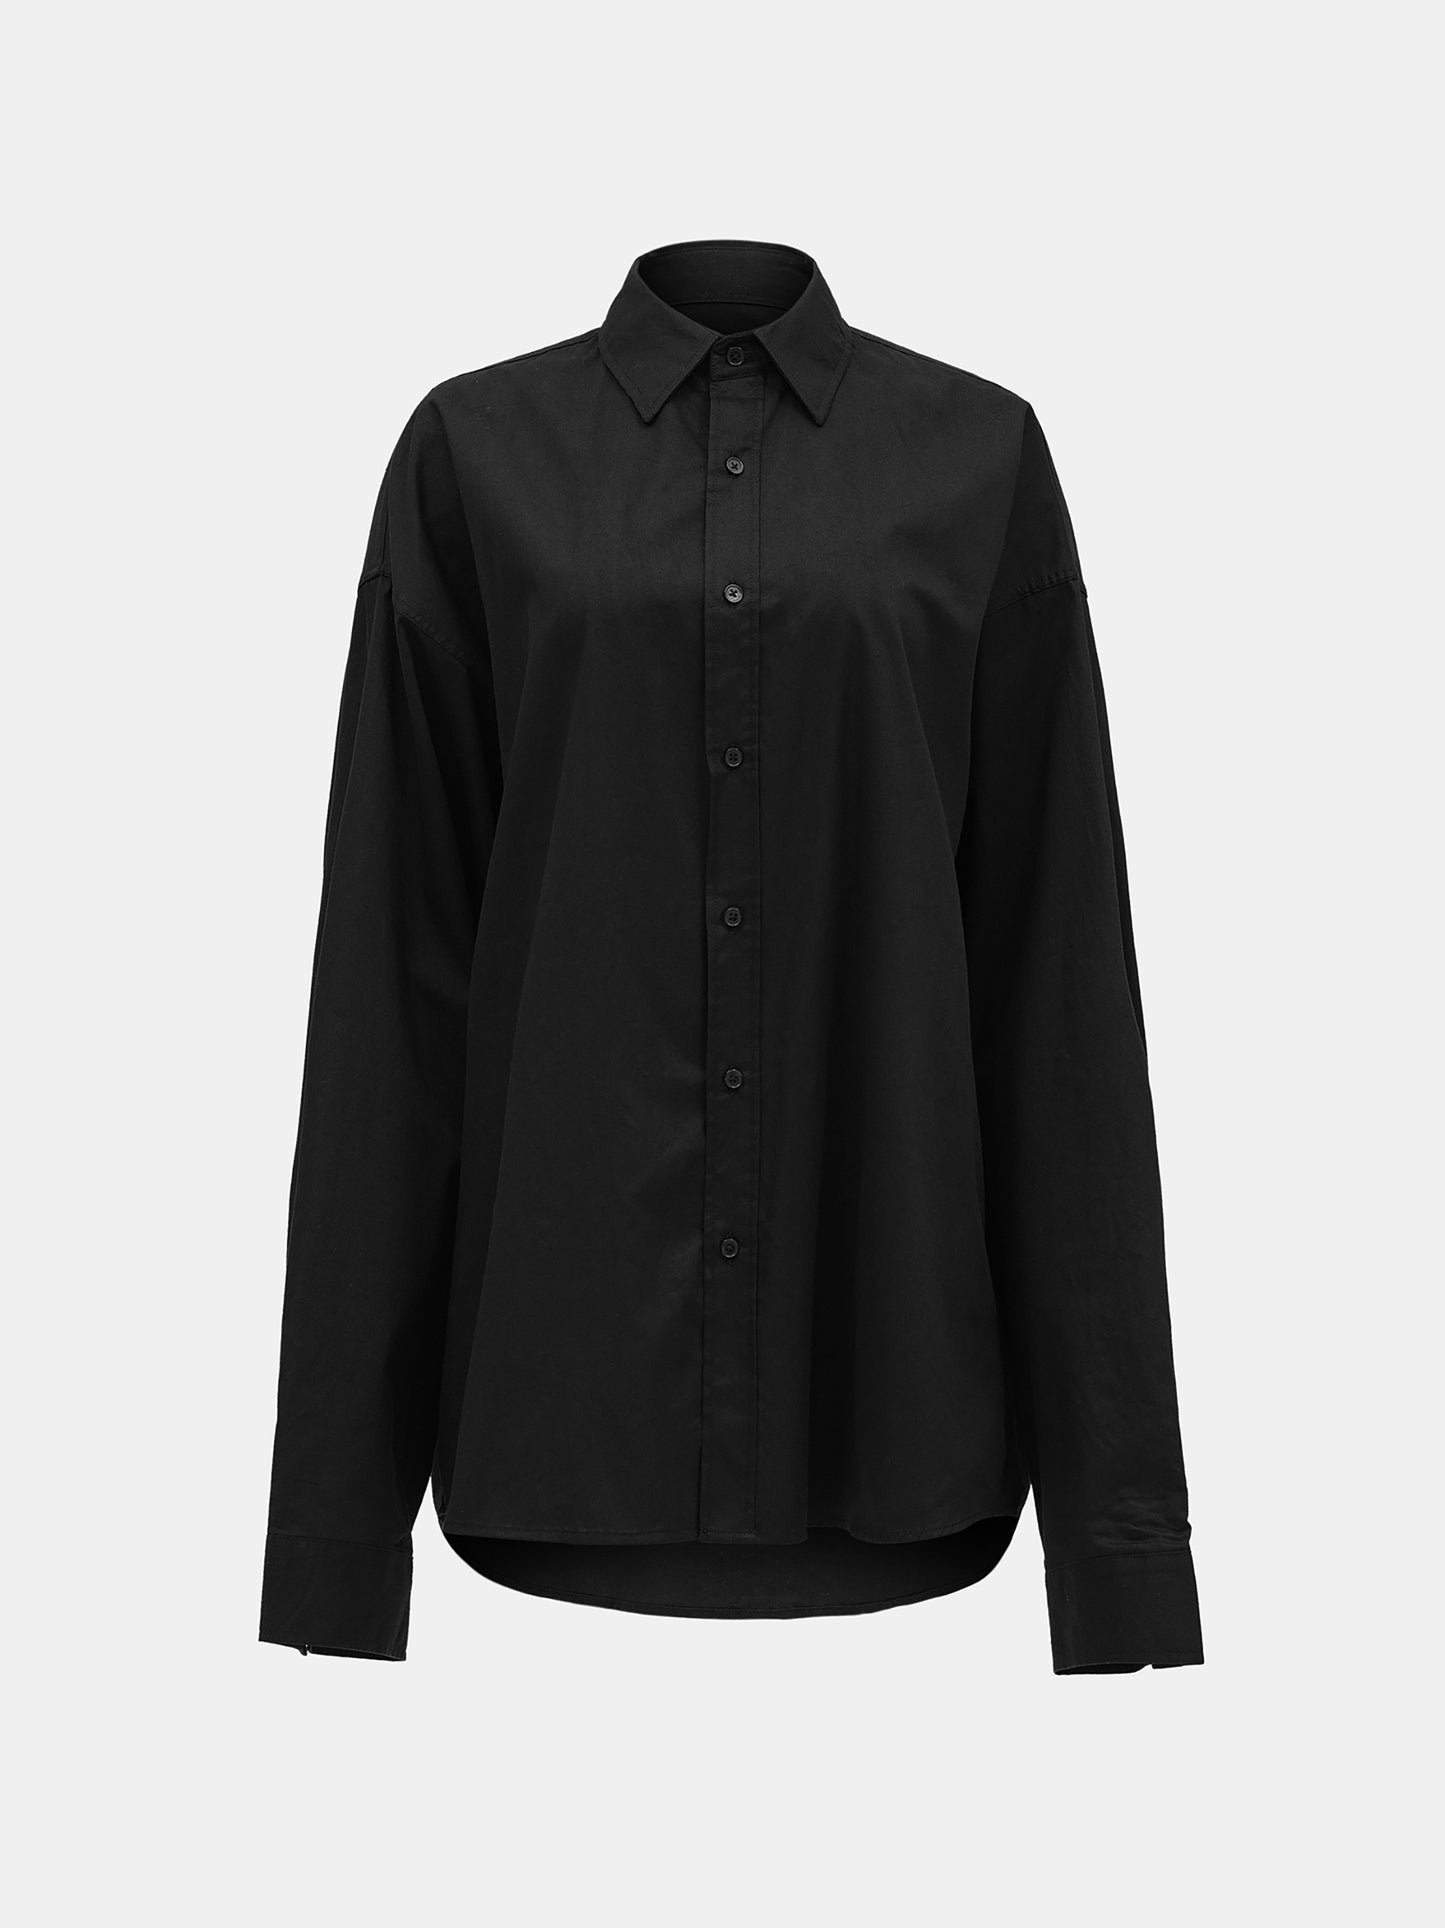 Over-Fit Cotton Shirt, Black – SourceUnknown